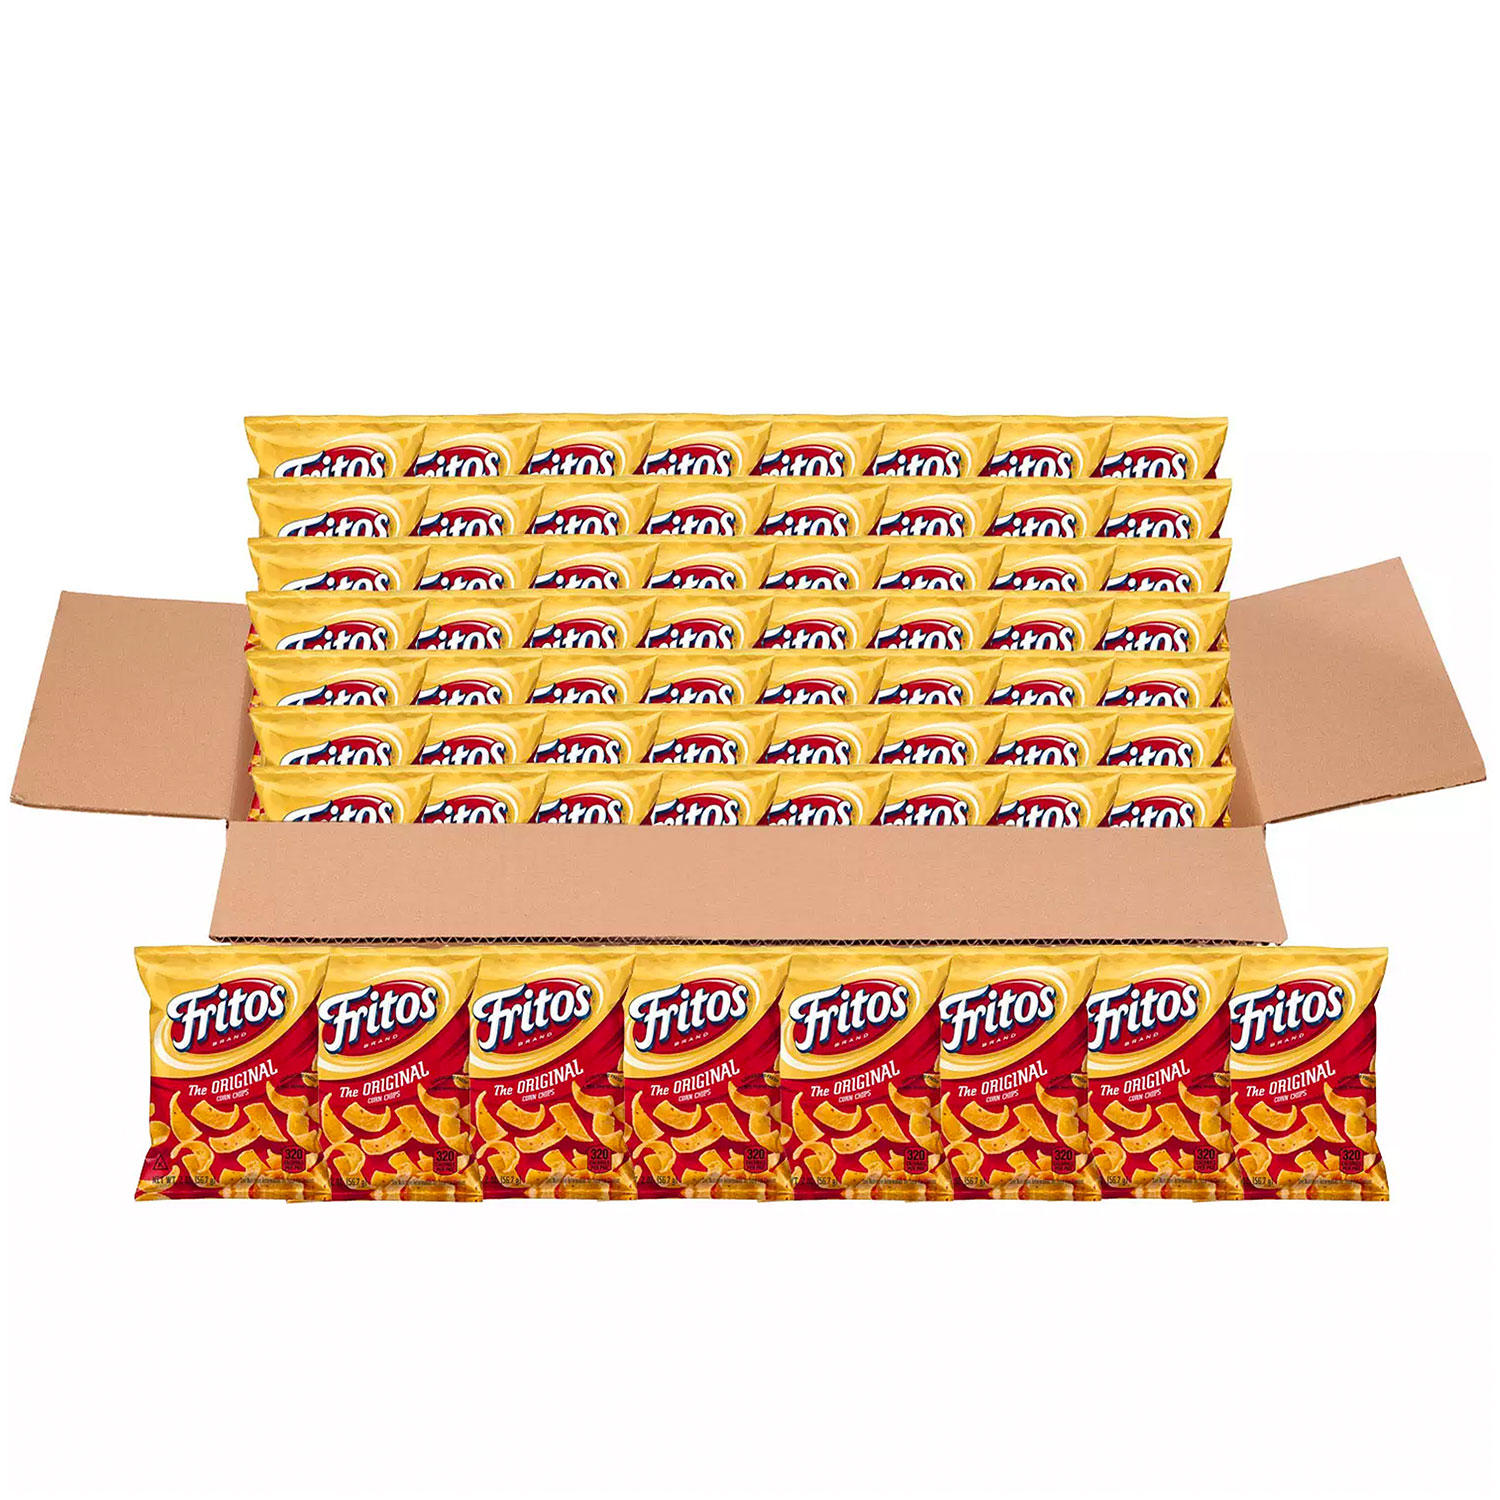 ((BB:04/23/2024))Complete pallet of assorted chips, containing 6 boxes of garlic onion chips, 18 boxes of Kettle Cooked Jalapeno Potato Chips, 6 boxes of Lays BBQ, plus 6 boxes of Fritos Original Corn Chips